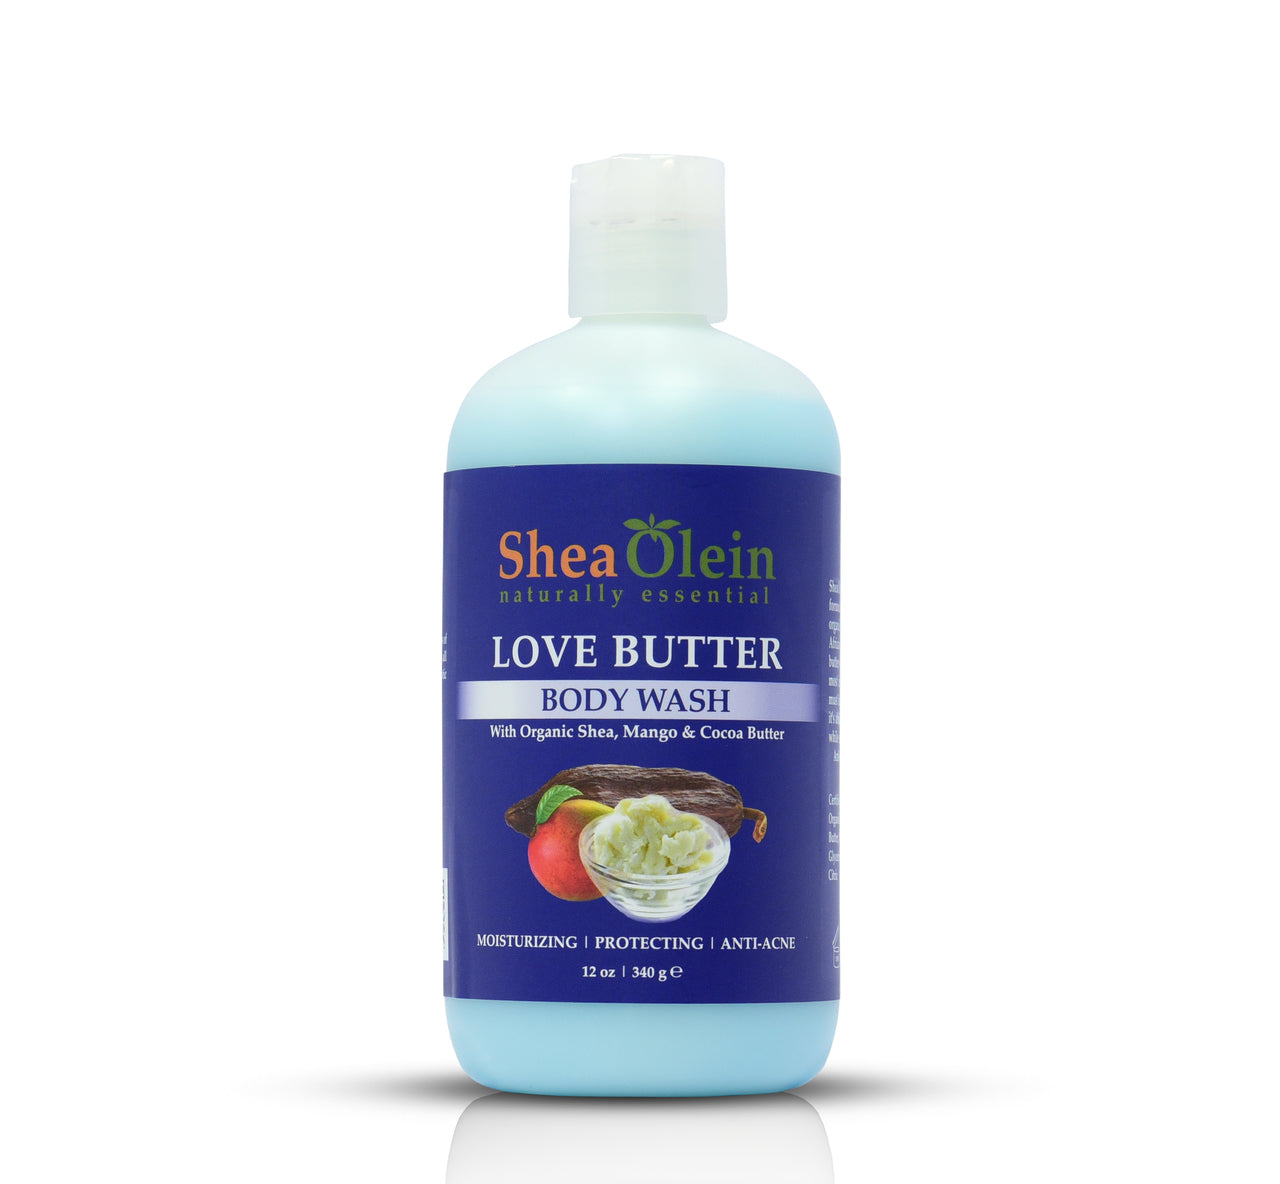 Love Butter Body Wash with Shea, Mango & Cocoa Butter 12oz